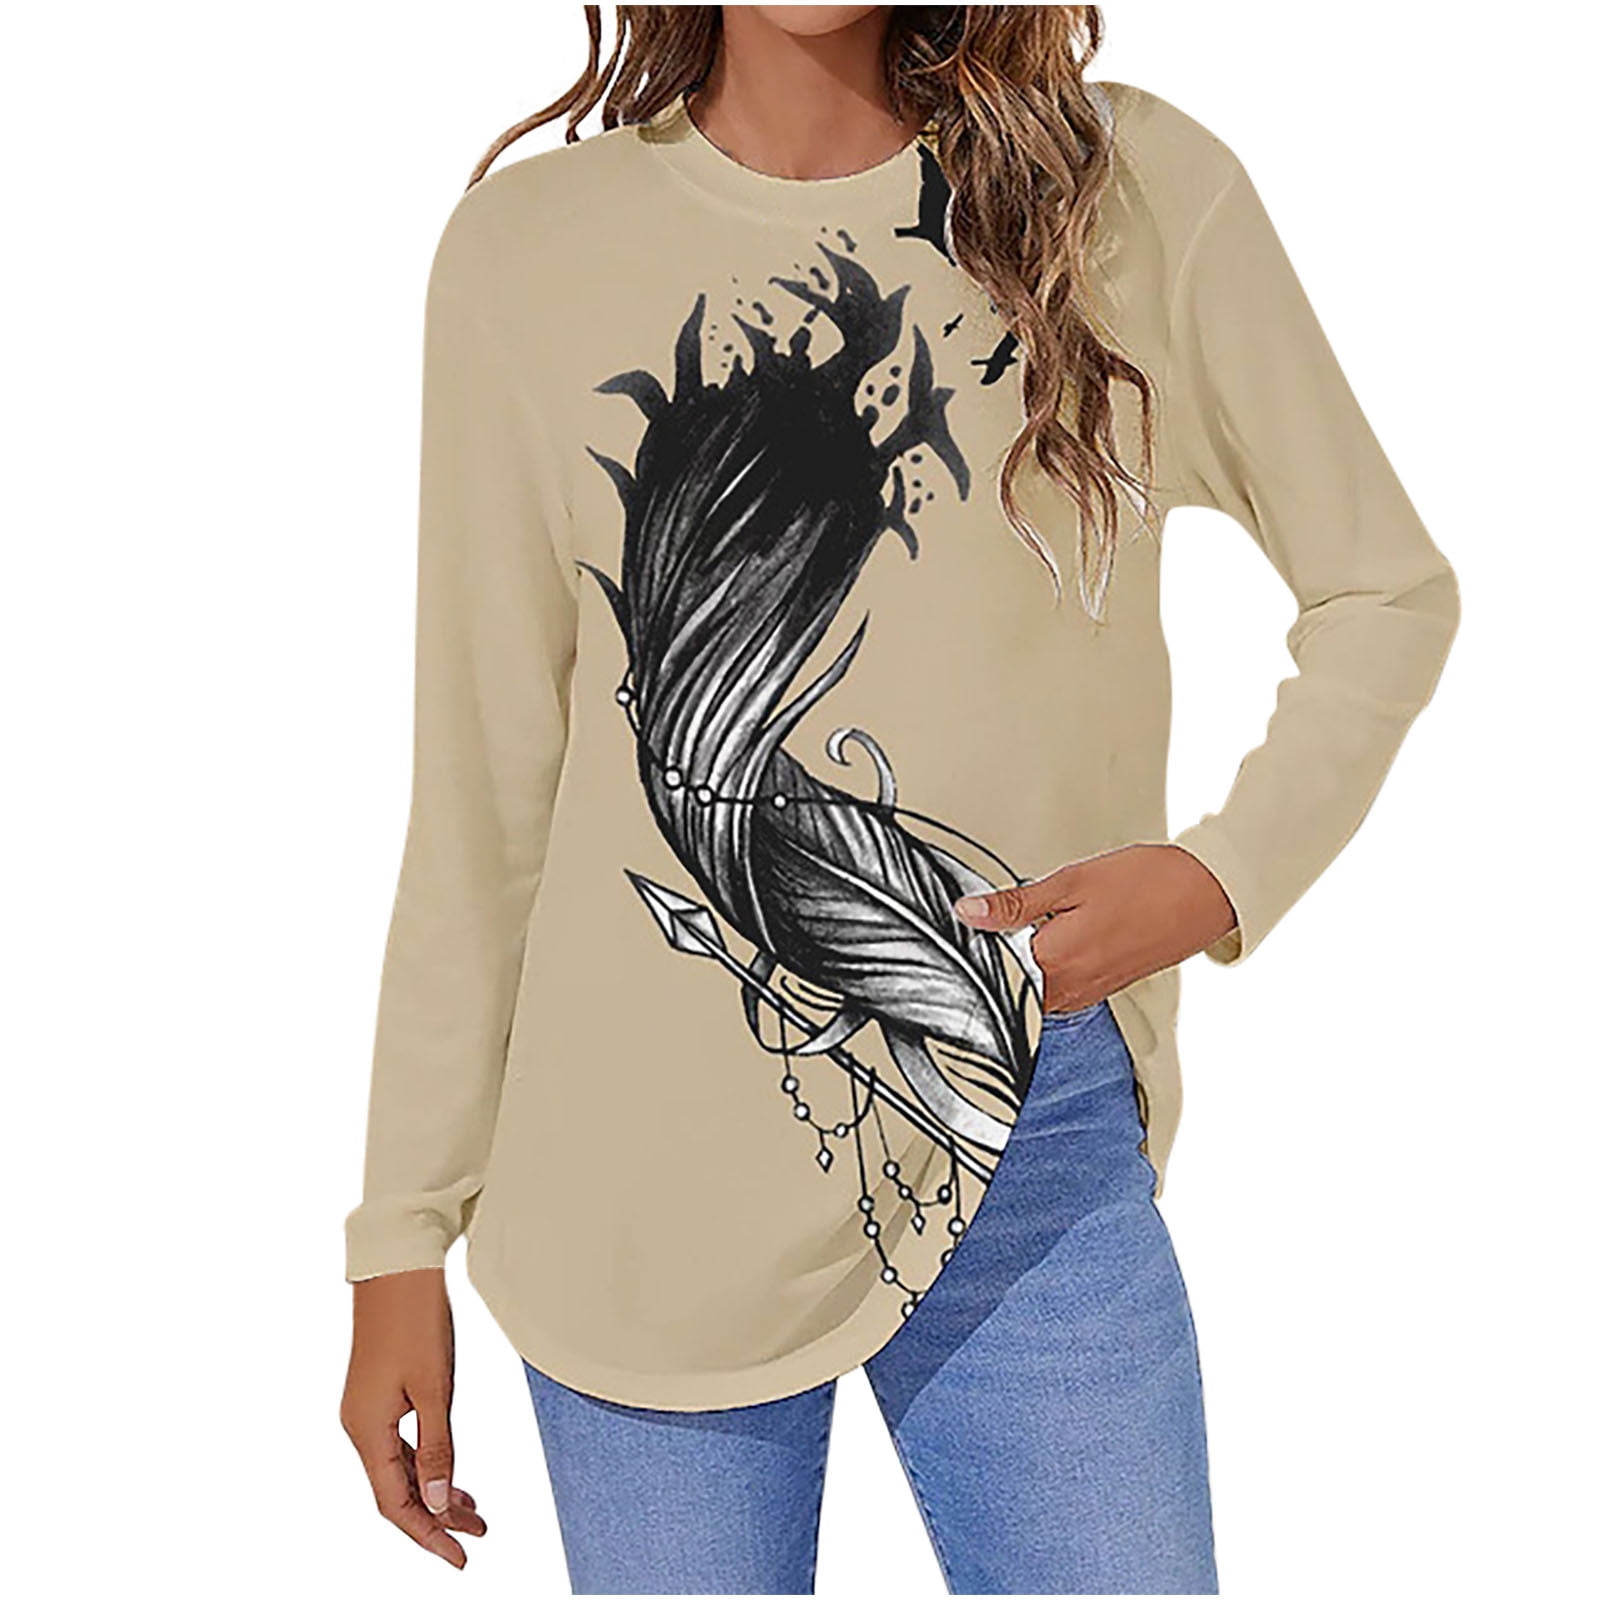 Tunic Tops to Wear with Leggings Round Neck Feather Graphic Comfy Flowy  Hide Belly Long Shirt Long Sleeve Shirts Dressy Plus Size Tops for Women  Beige M 